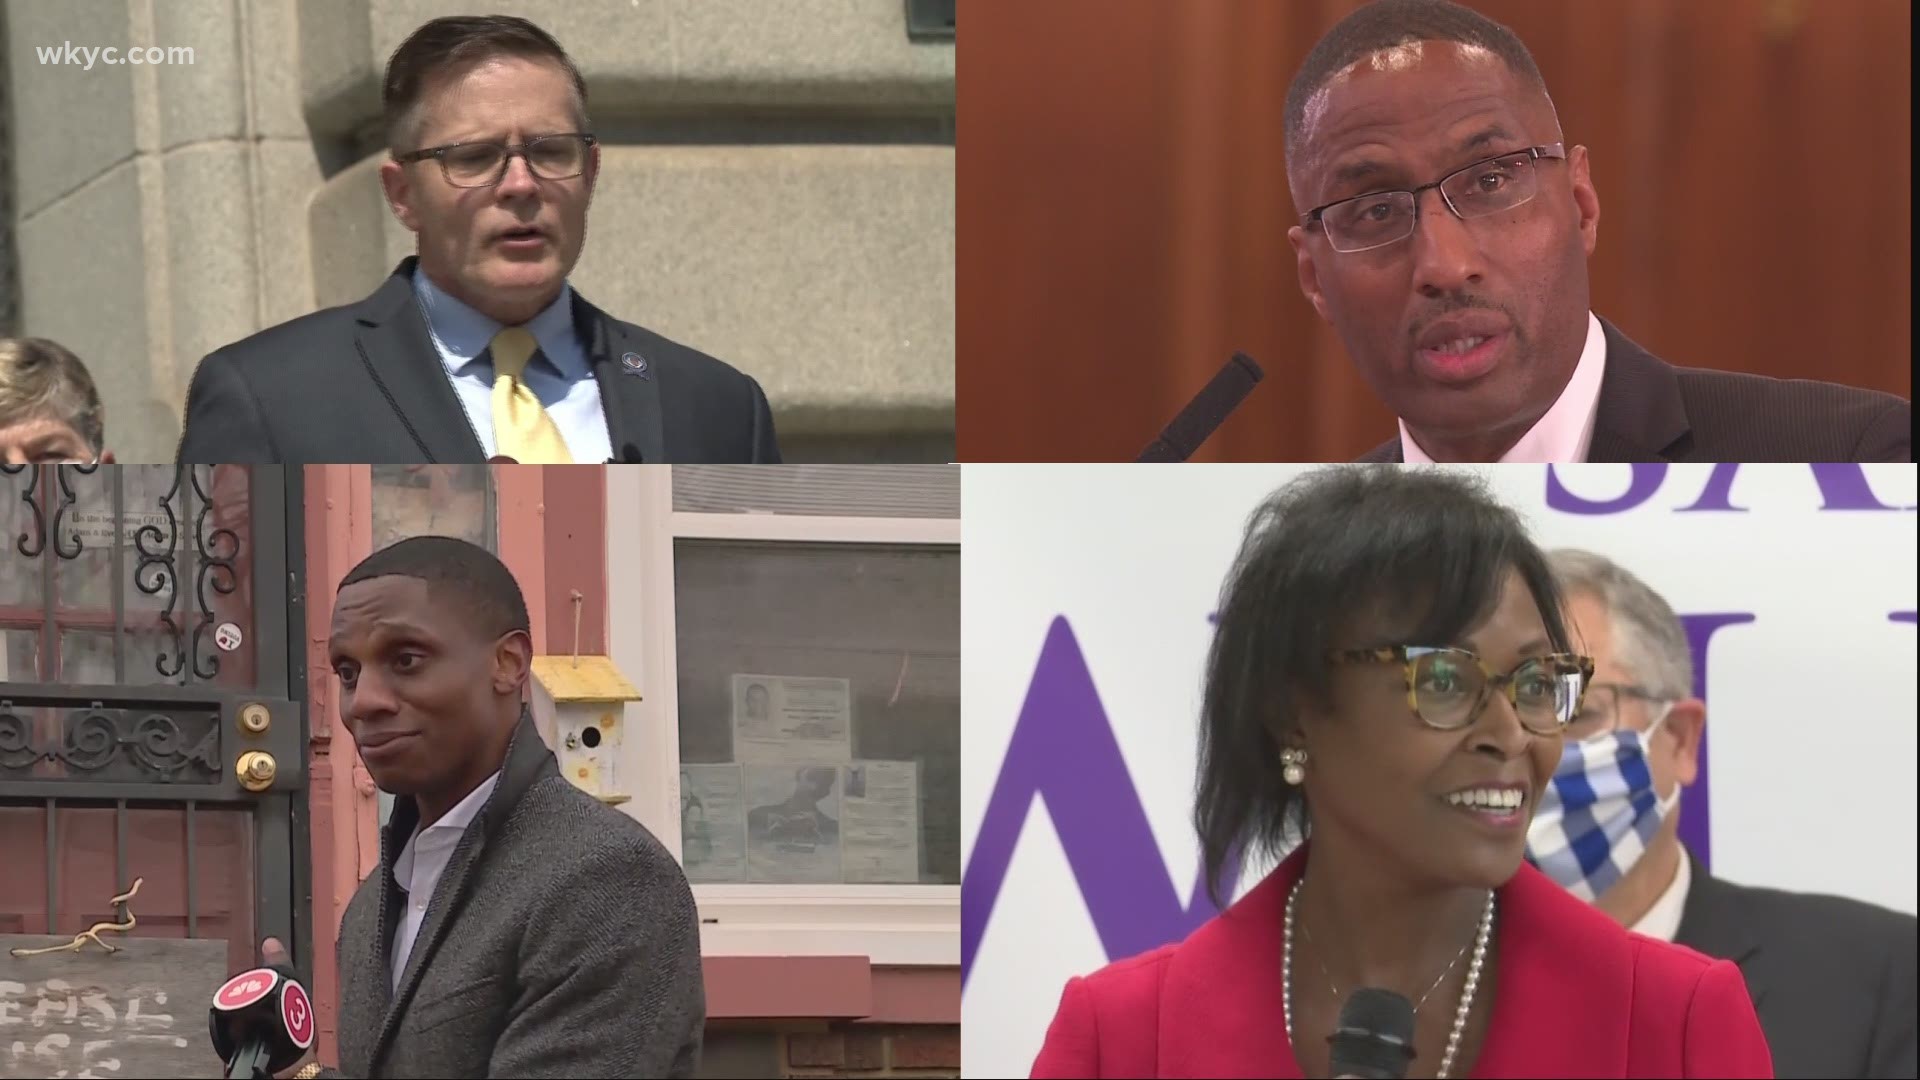 Dennis Kucinich, Basheer Jones, and Landry Simmons all submitted their papers on Wednesday. They join Justin Bibb, Sandra Williams, Kevin Kelley and Zach Reed.